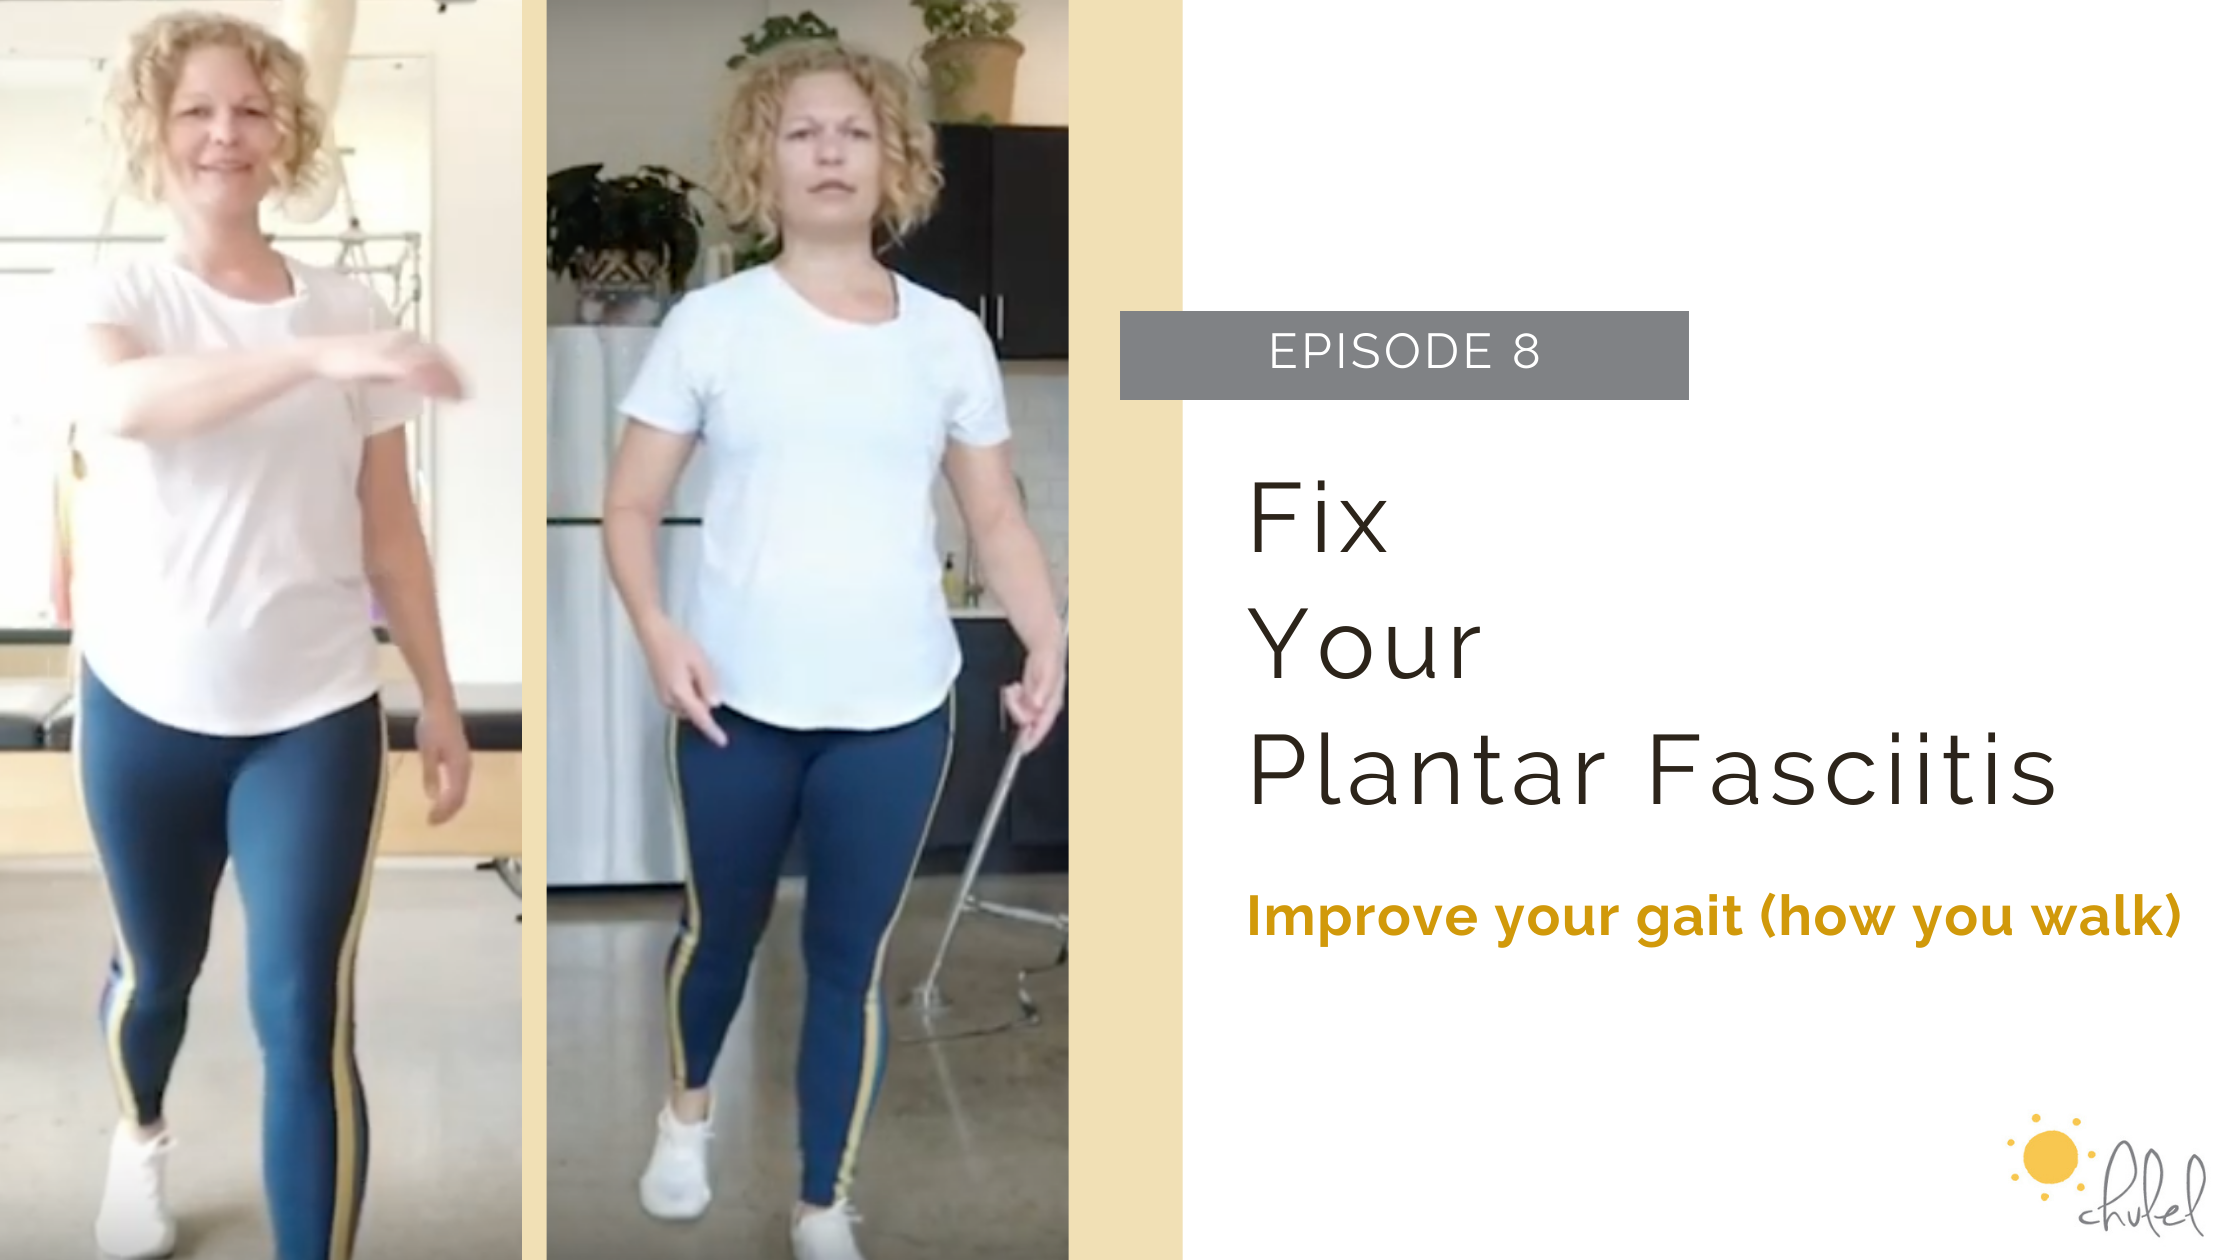 Fix Your Plantar FasciitisEpisode 8 How to Improve Your Gait — Chulel